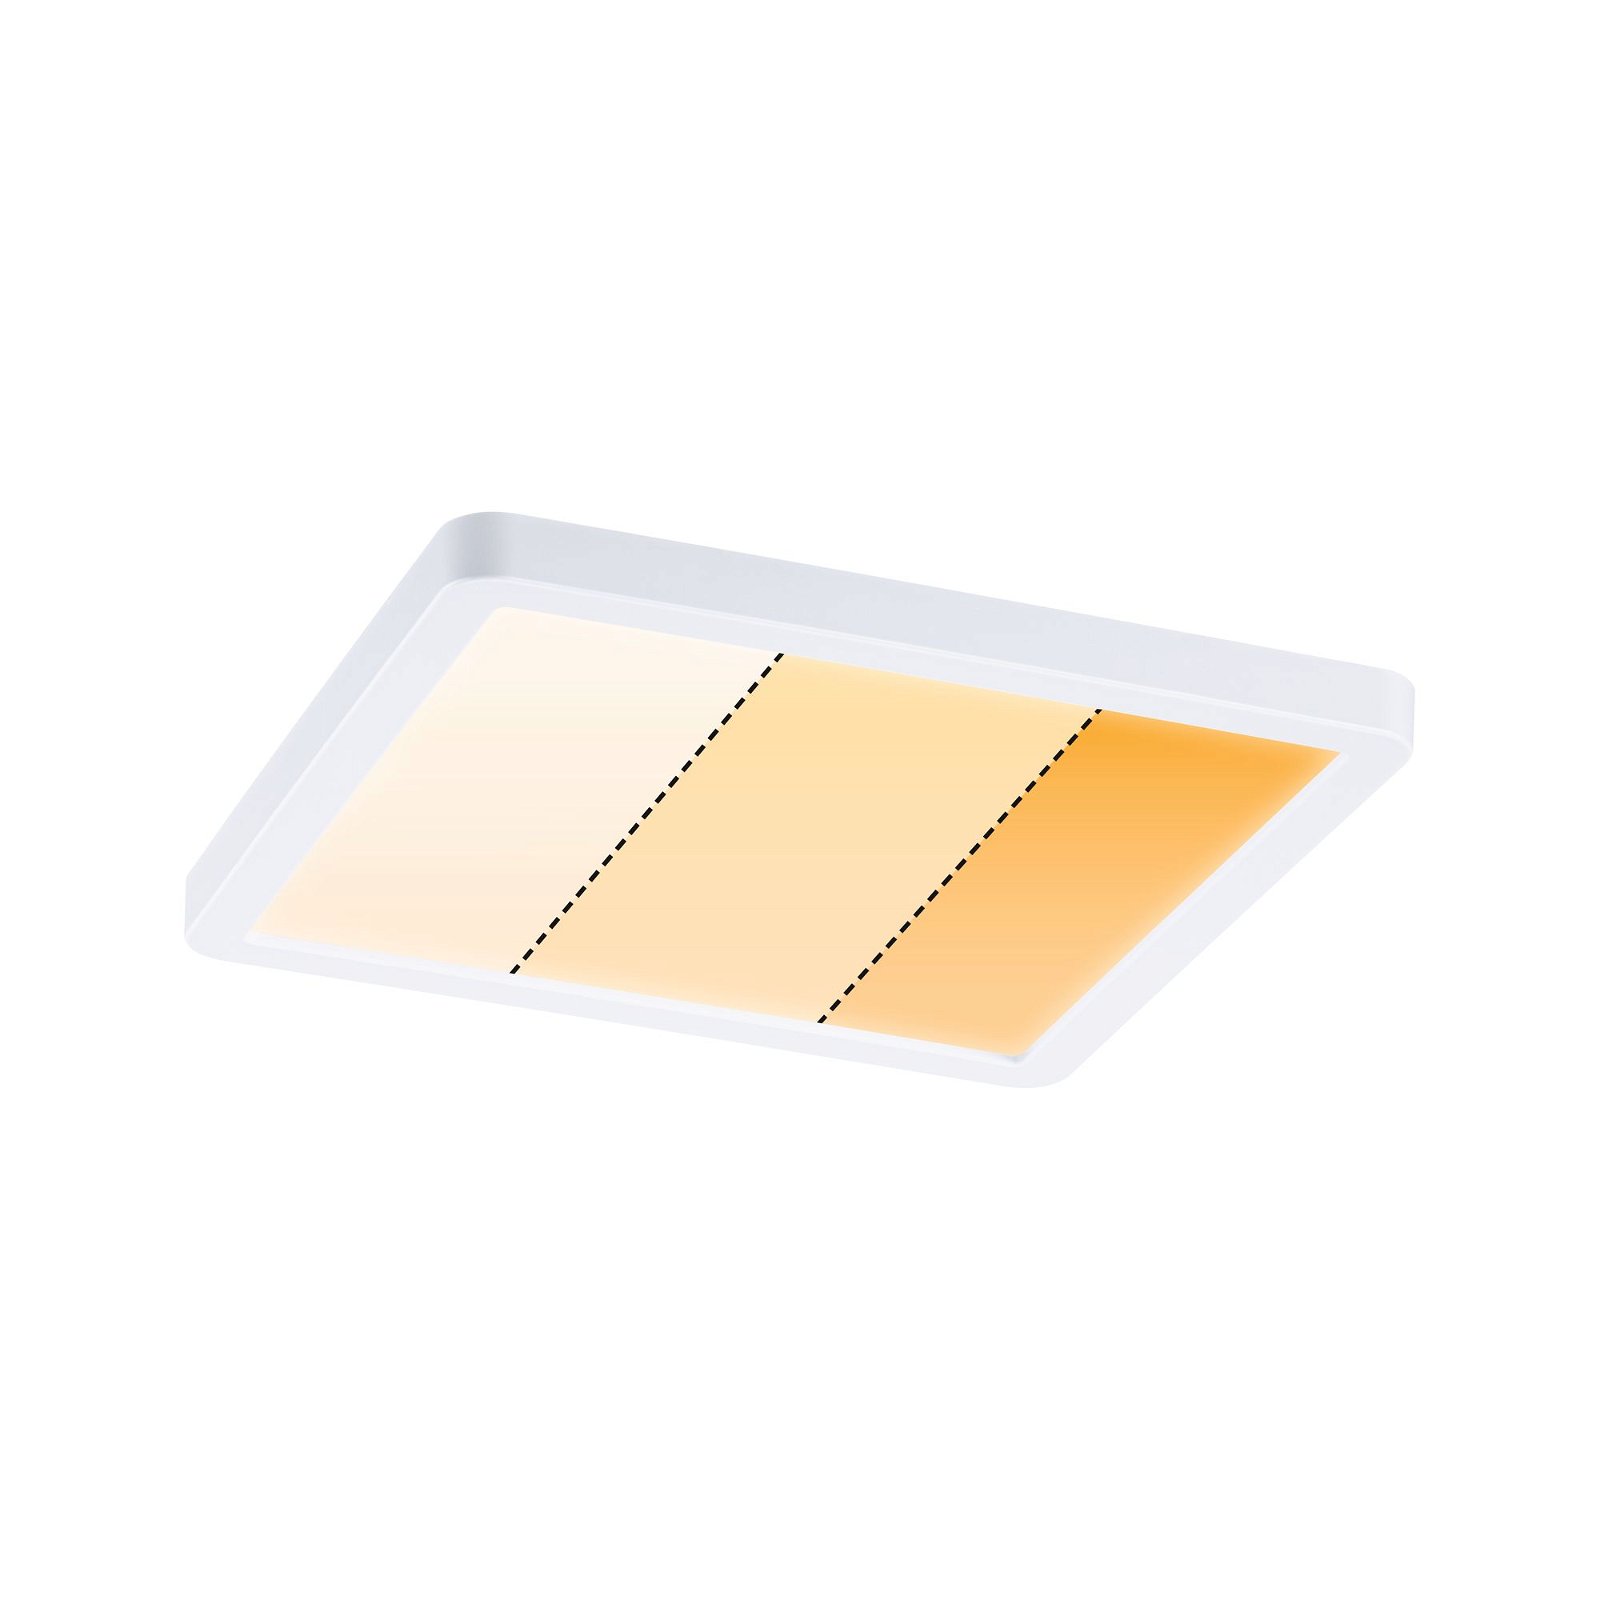 VariFit LED Recessed panel Dim to Warm Areo IP44 square 175x175mm 13W 1200lm 3 Step Dim to warm Matt white dimmable